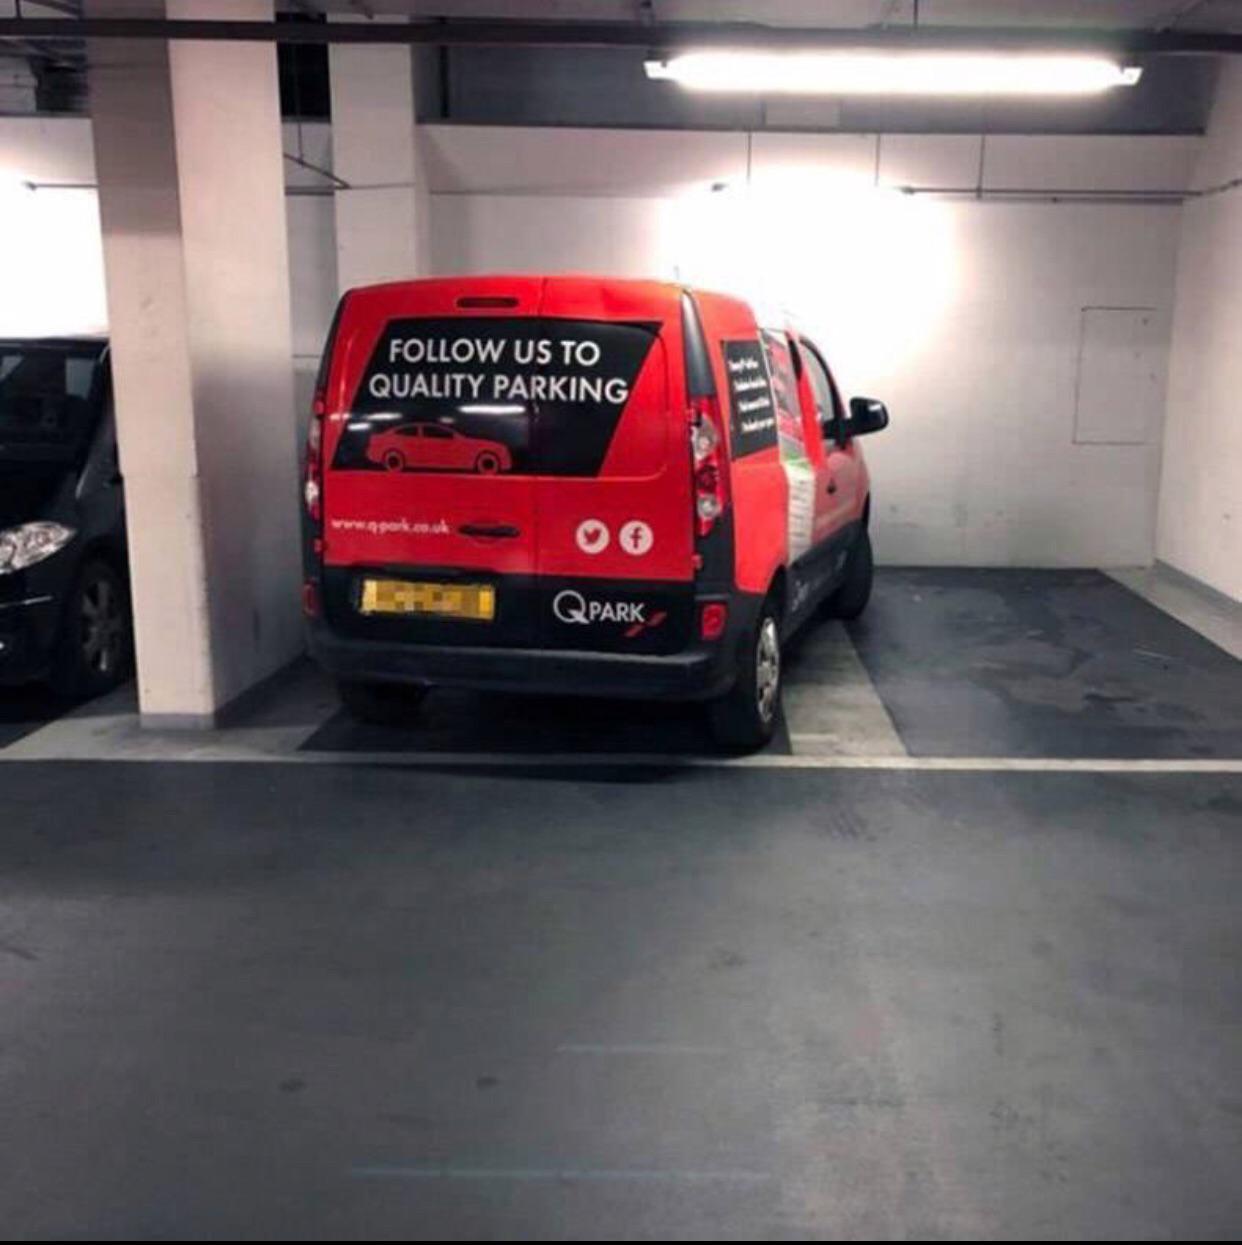 Car - Us To Quality Parking Qpark